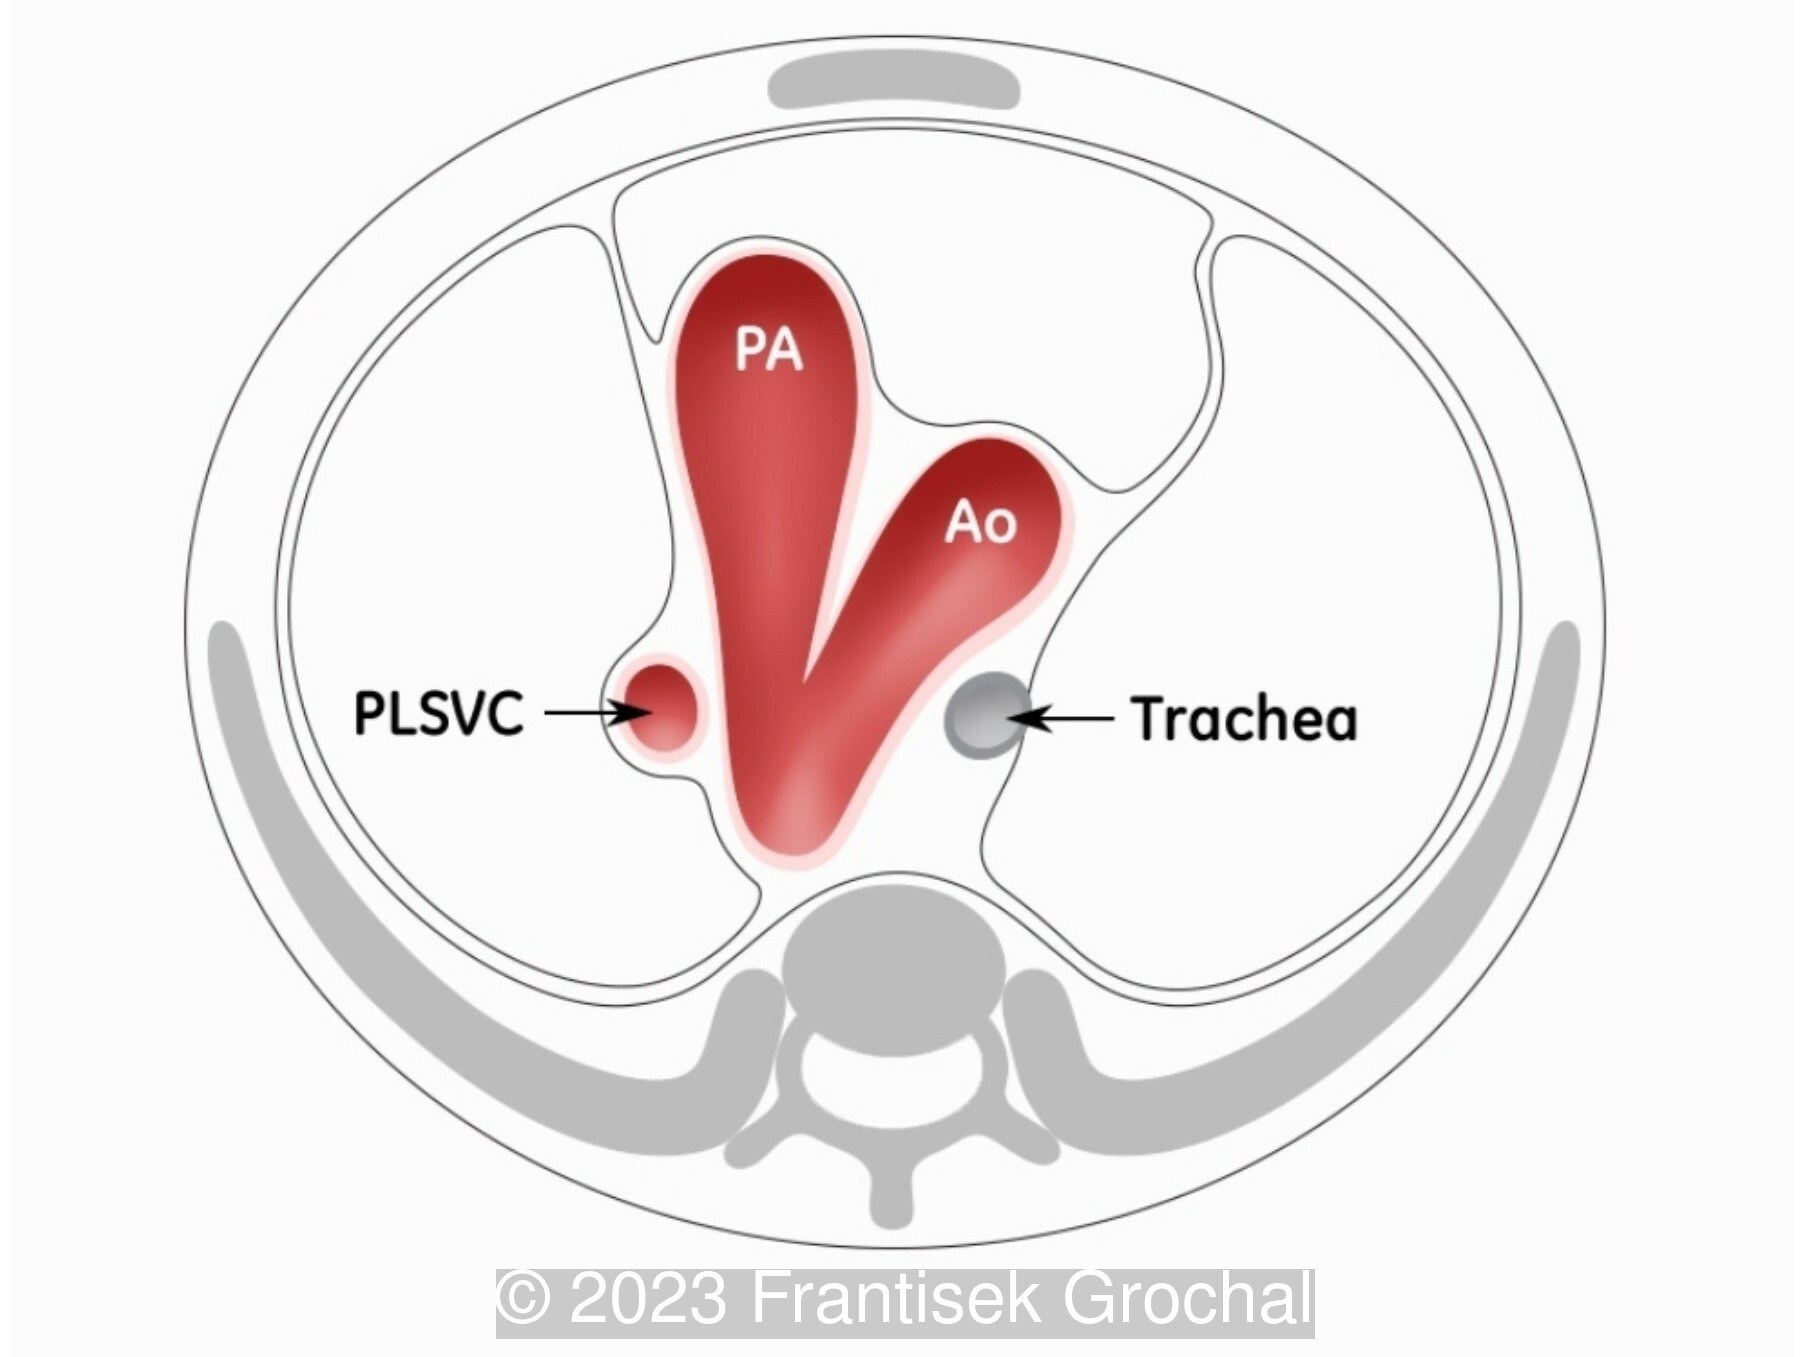 Schematic drawing of the three-vessel-trachea view showing an abnormal configuration of the vessels. The LSVC, the ductal arch and the aortic arch are seen from left to right.